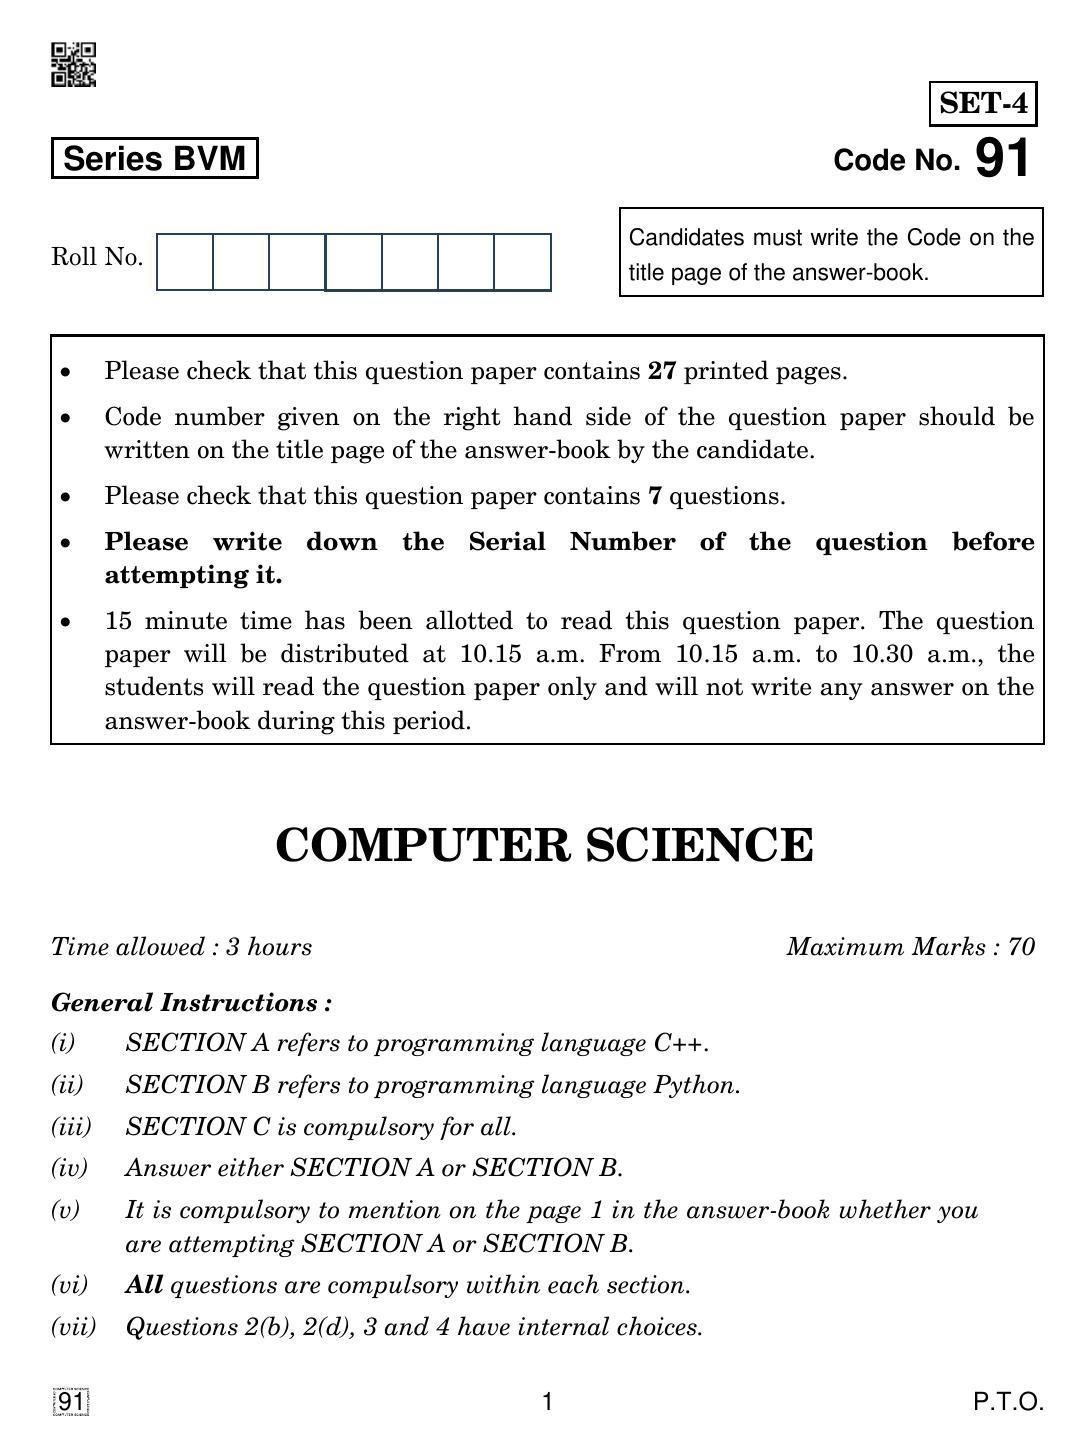 CBSE Class 12 91 Computer Science 2019 Question Paper - Page 1